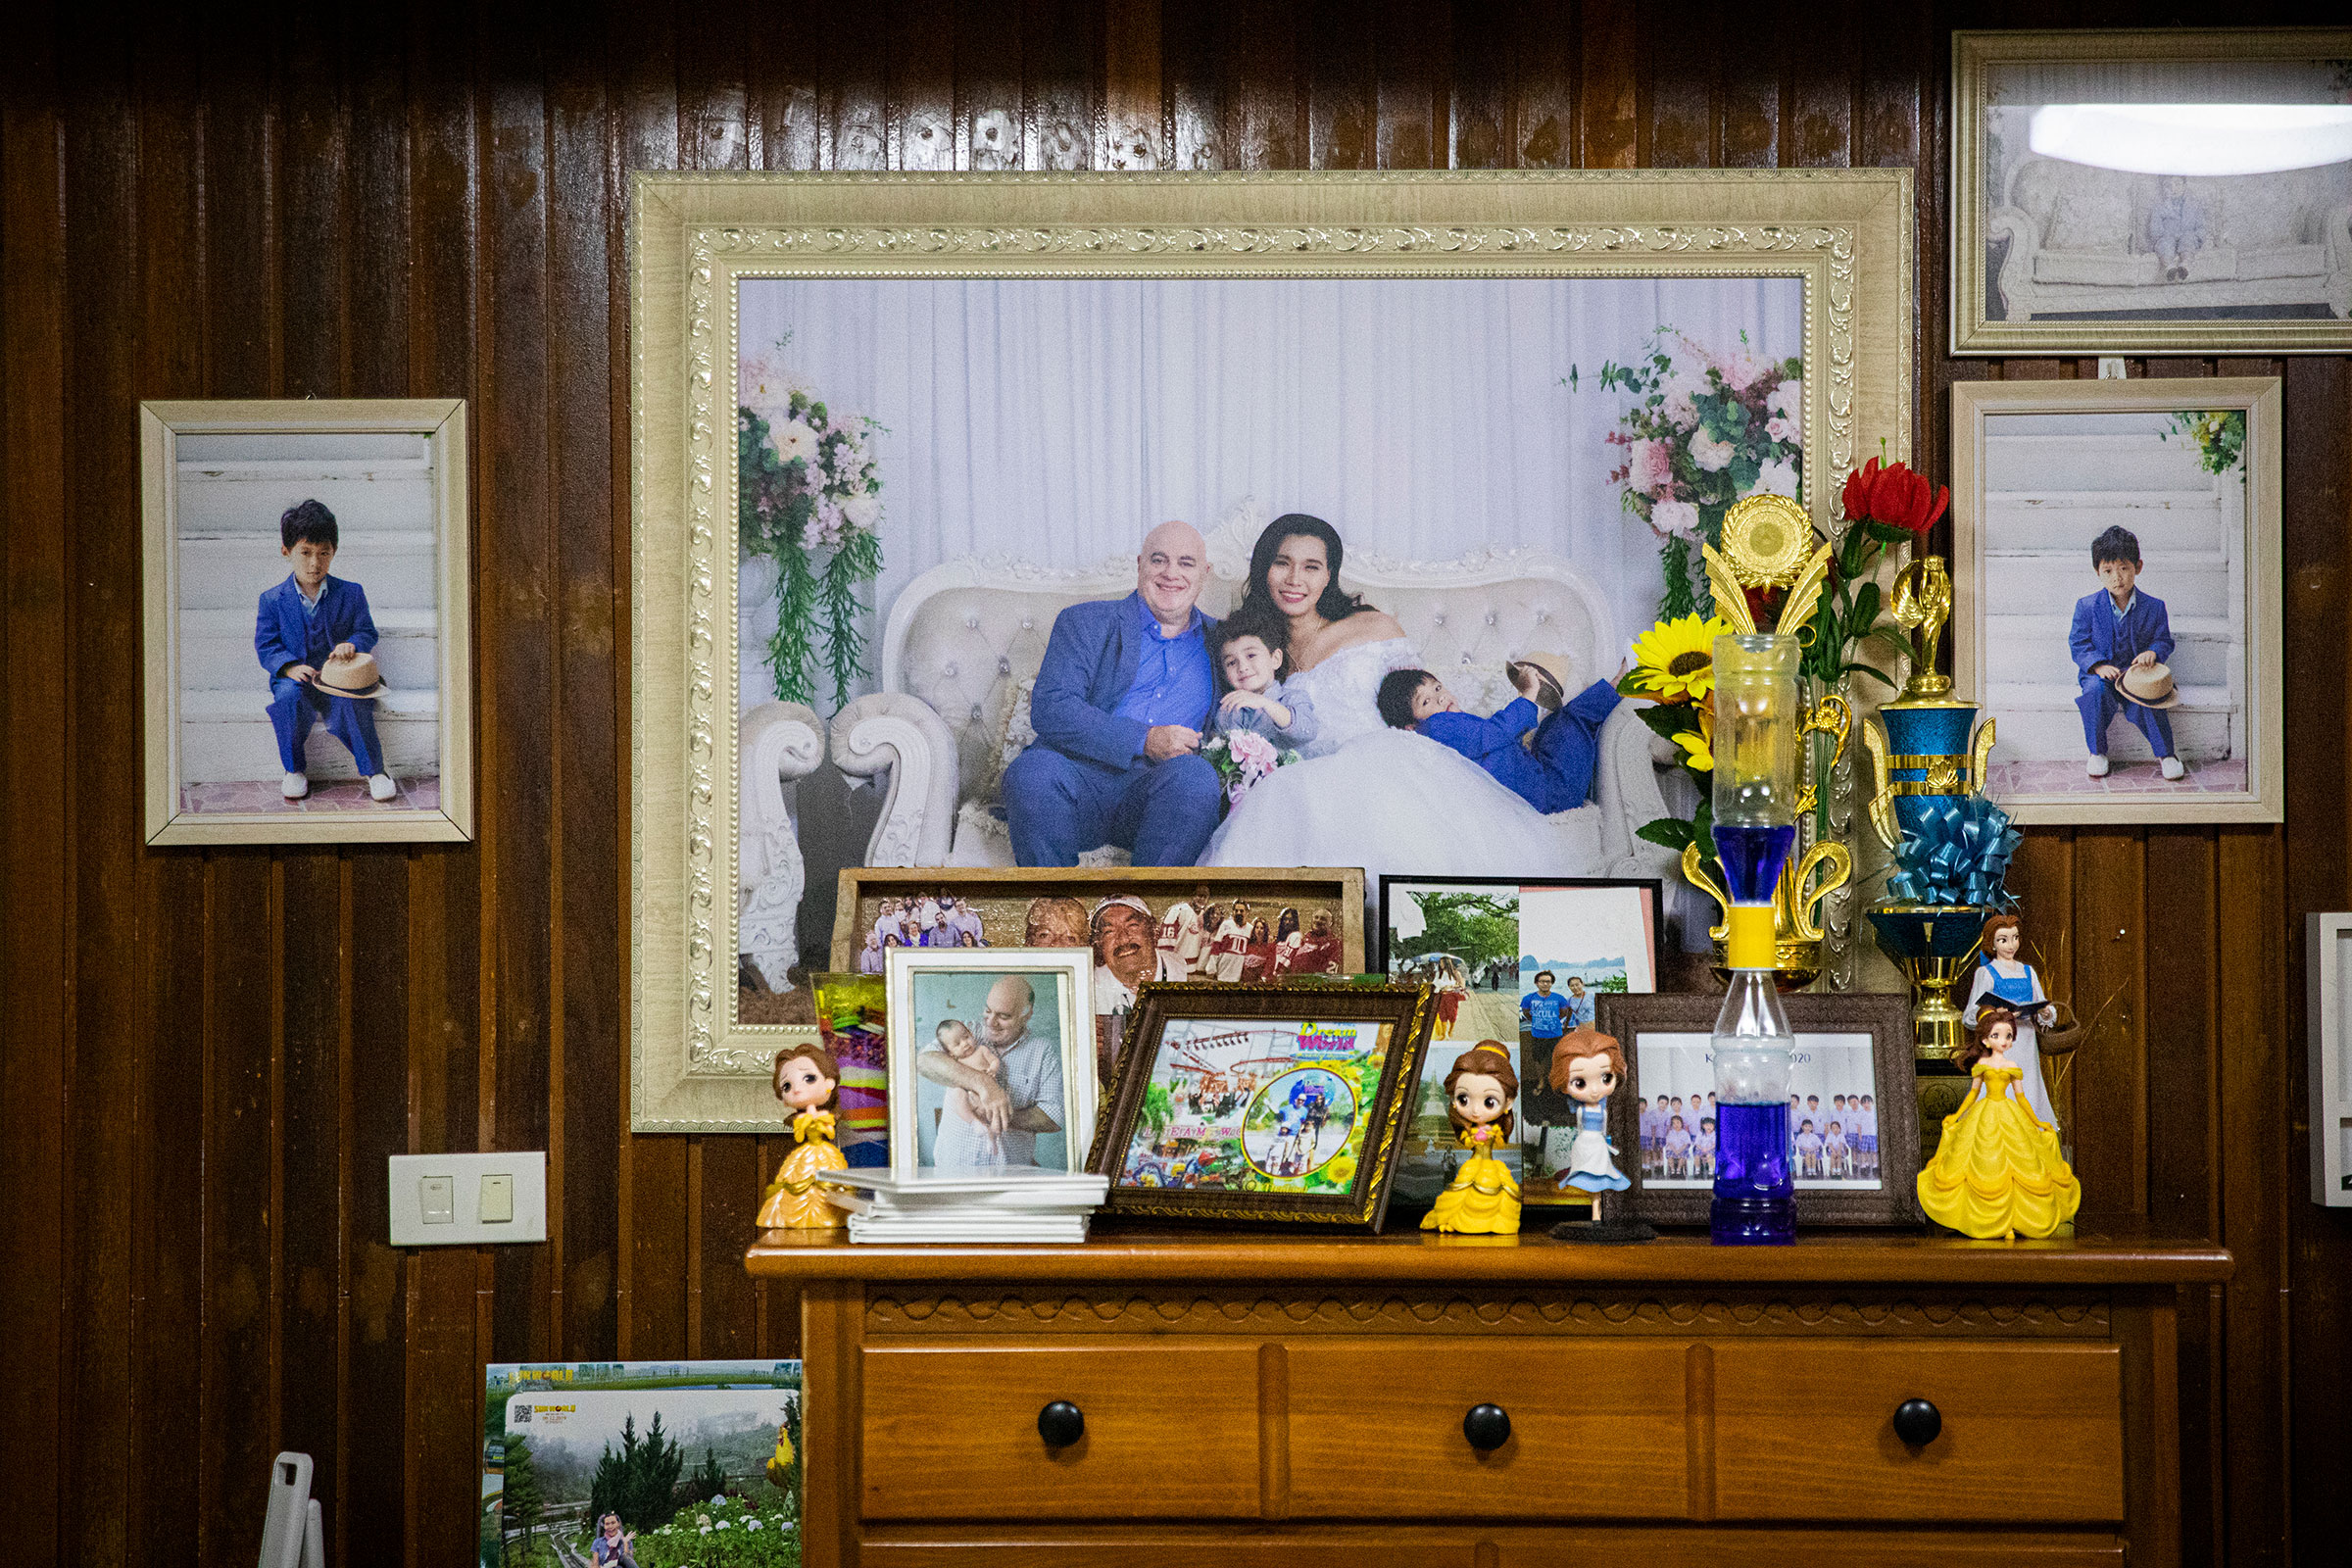 Family portraits hung on the walls of Gina and Lee's home. (Lauren DeCicca for TIME)